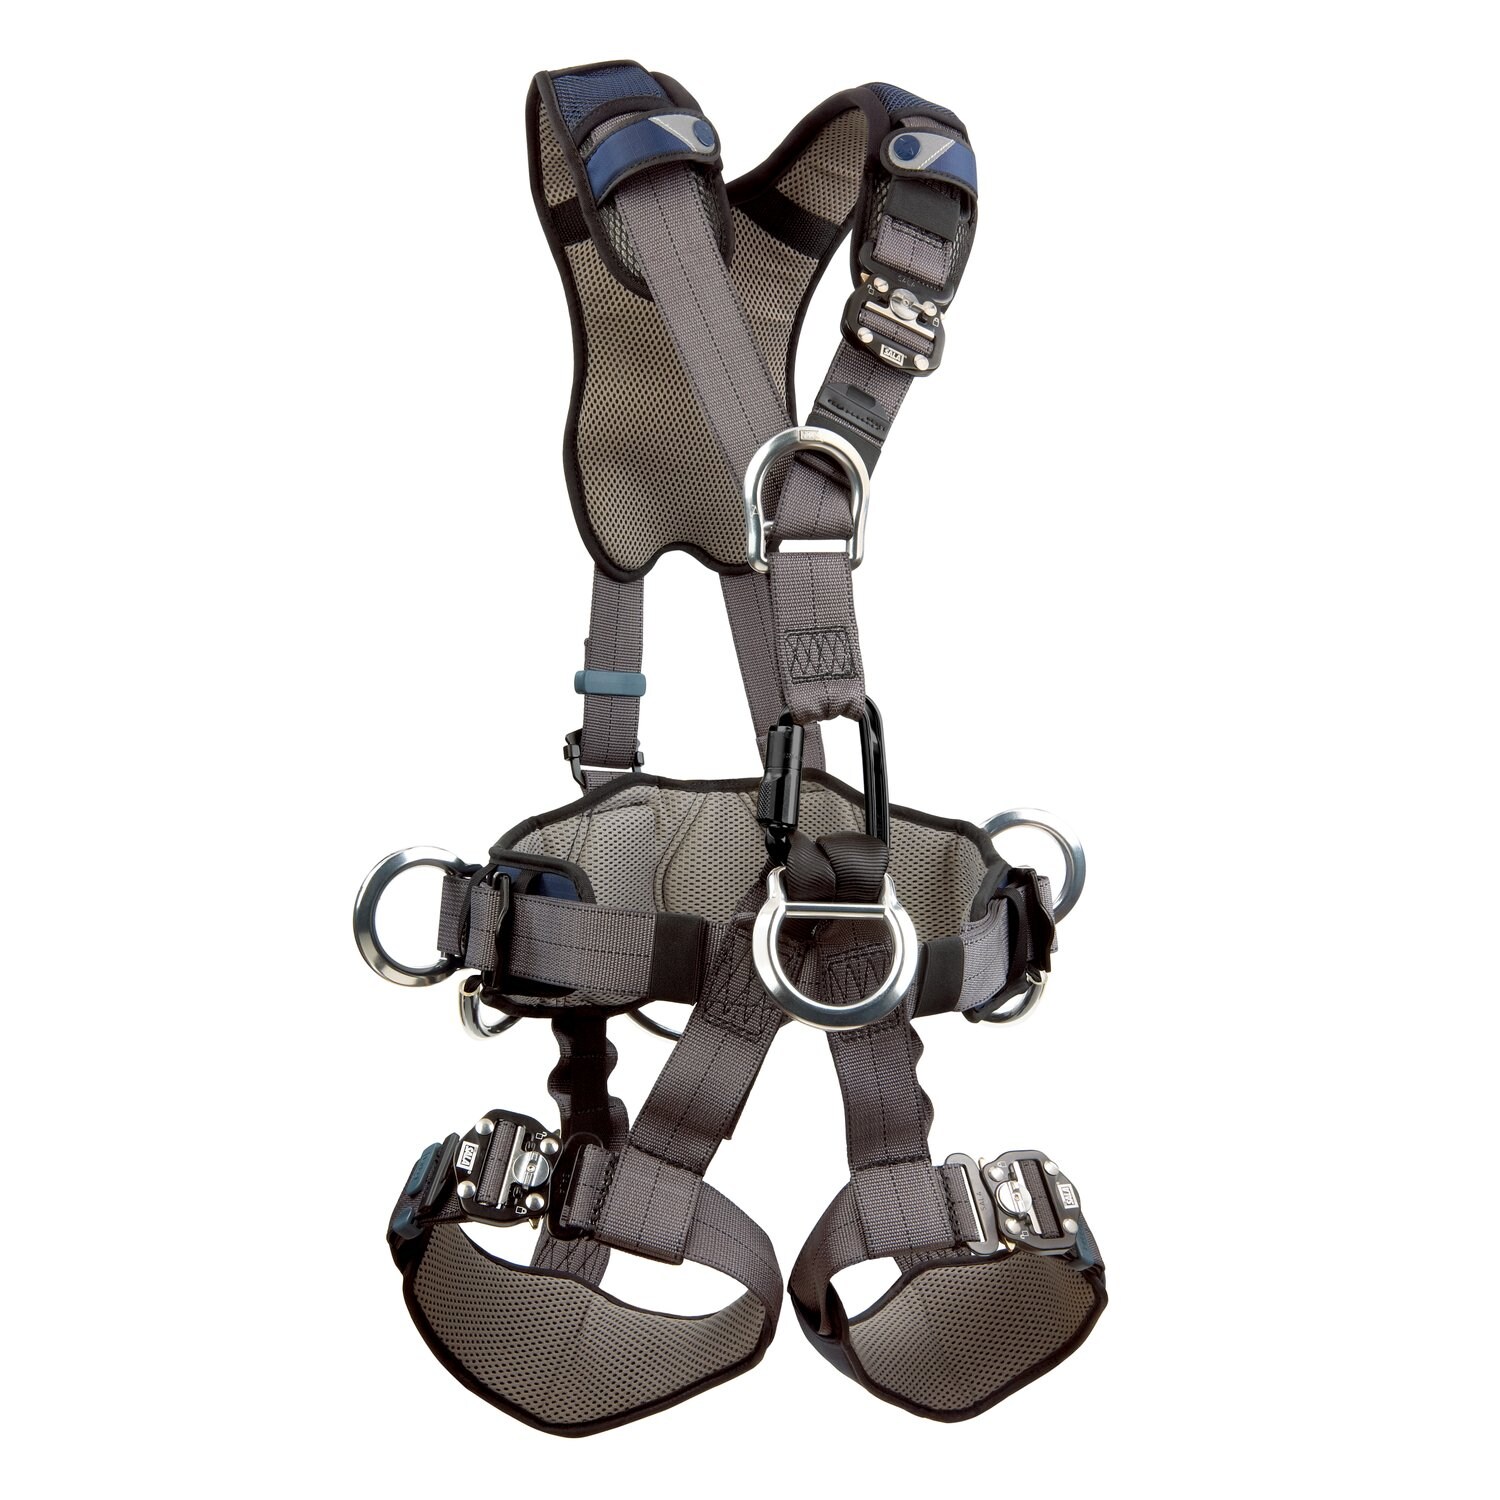 7012816331 - 3M DBI-SALA ExoFit NEX Comfort Rope Access Climbing/Positioning/Rescue/Suspension Safety Harness 1113348, X-Large